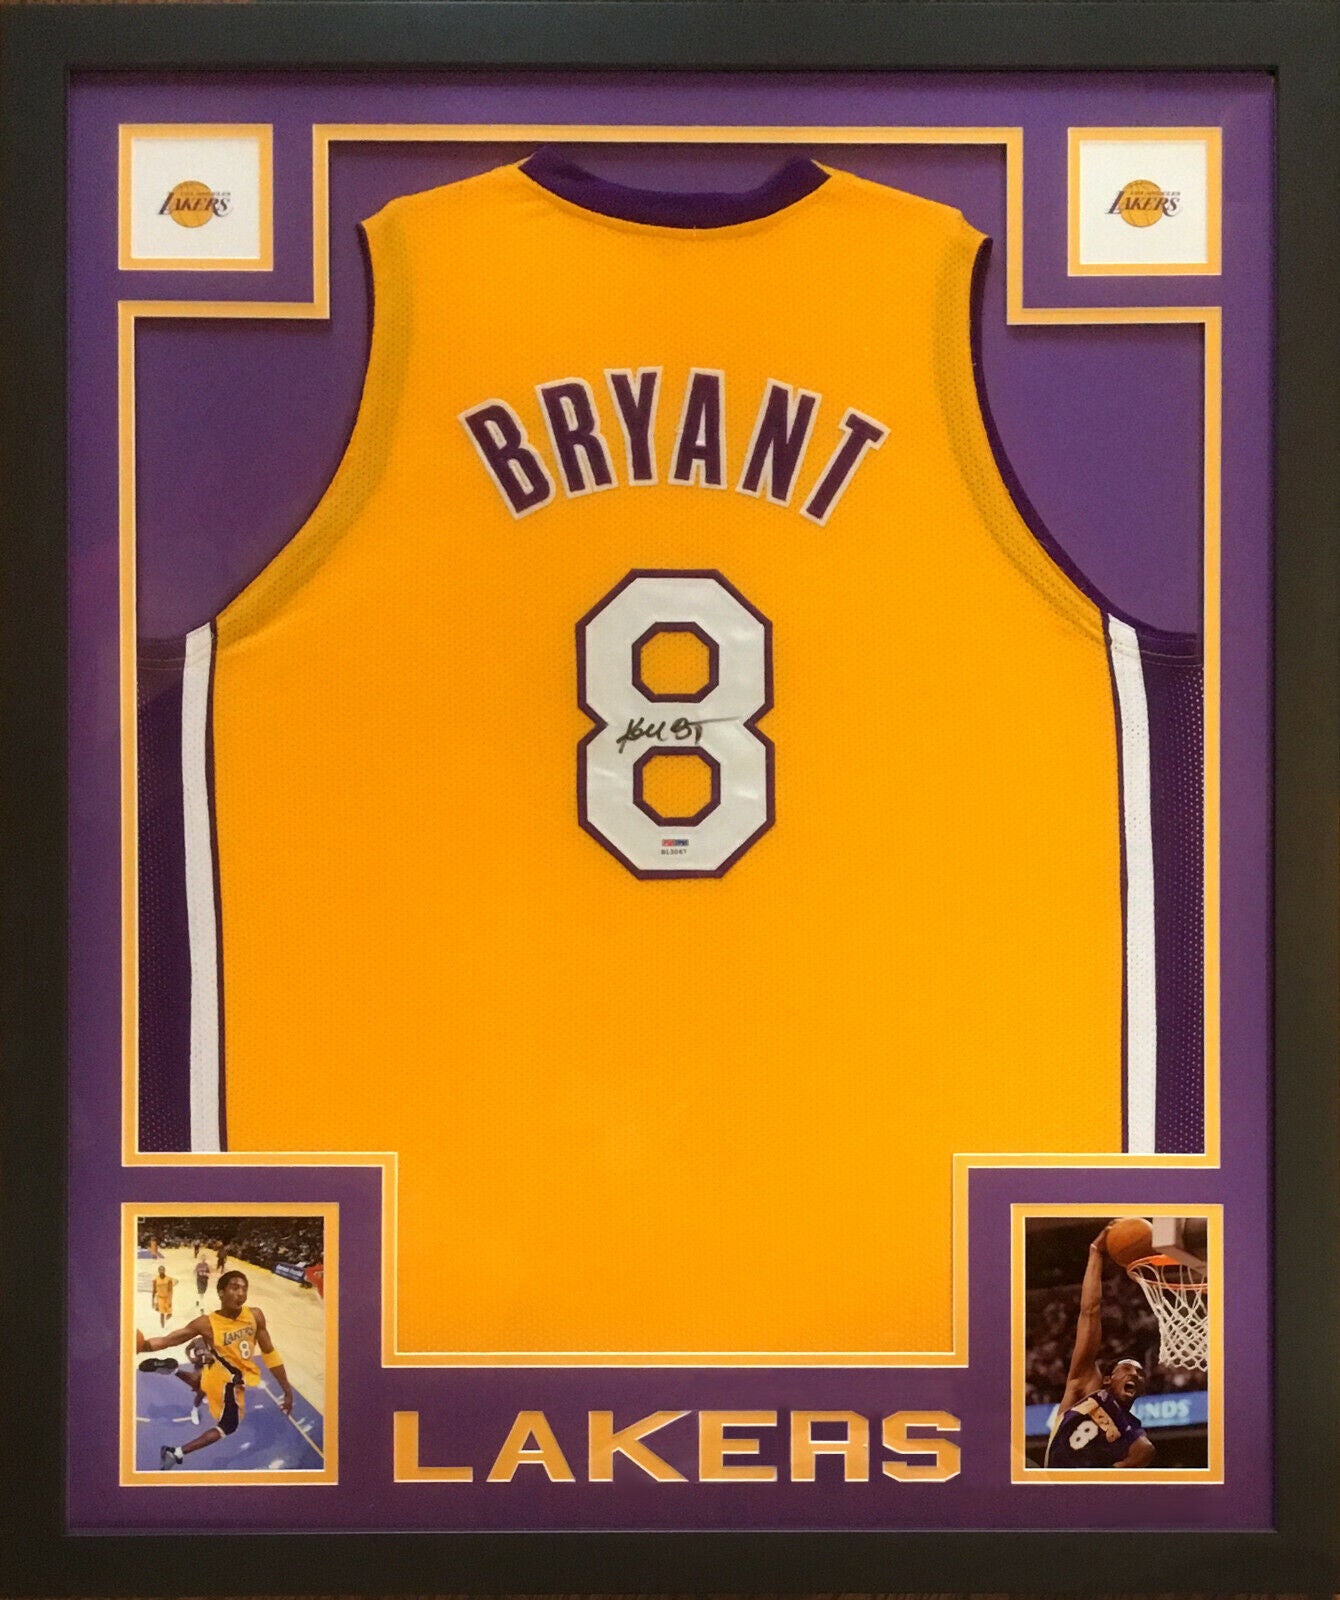 Autographed signed Kobe Bryant Jersey - collectibles - by owner